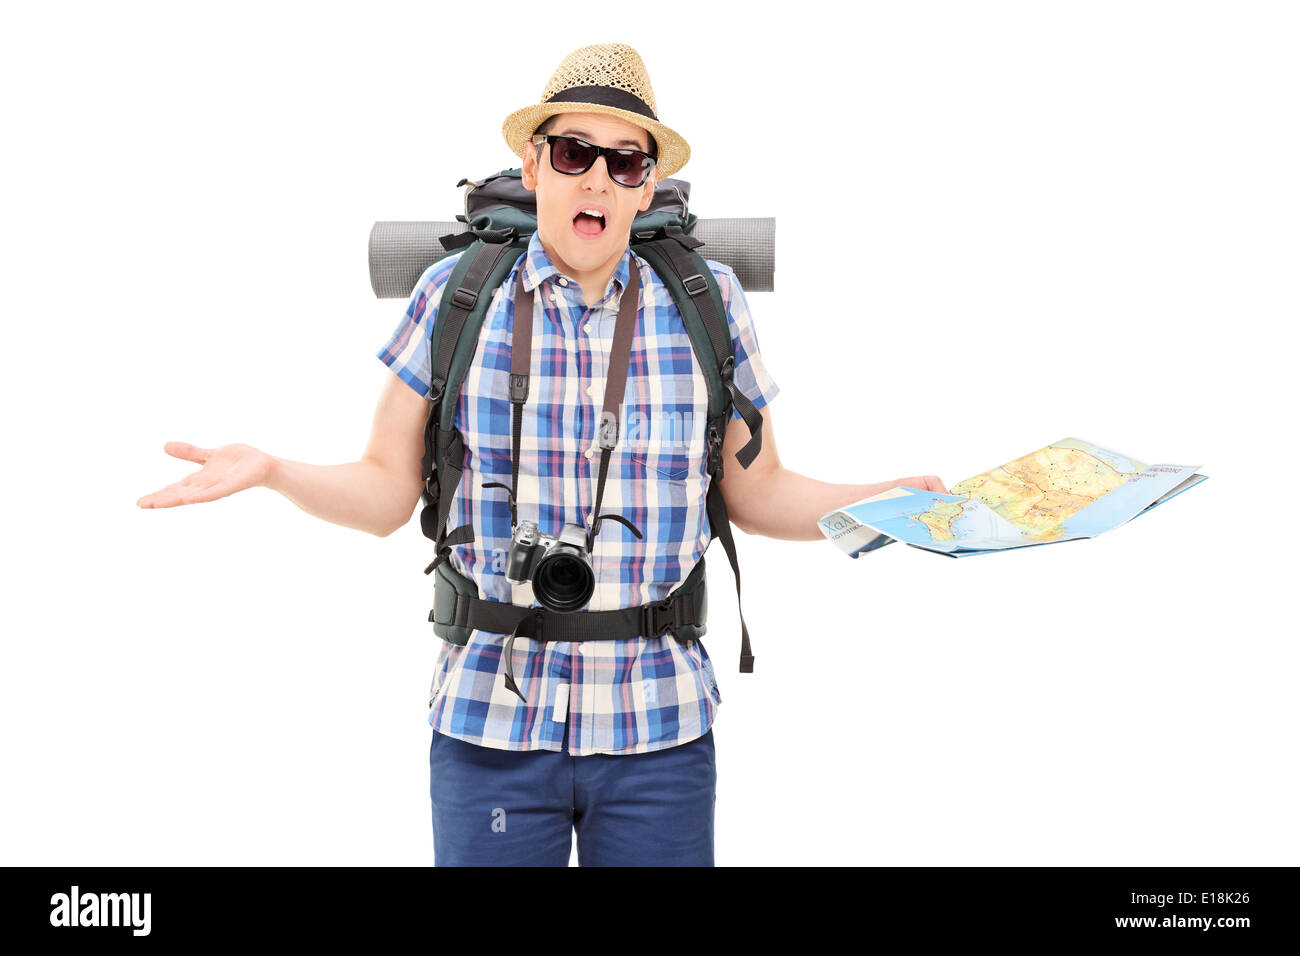 Lost male tourist holding a map and gesturing with hands Stock Photo